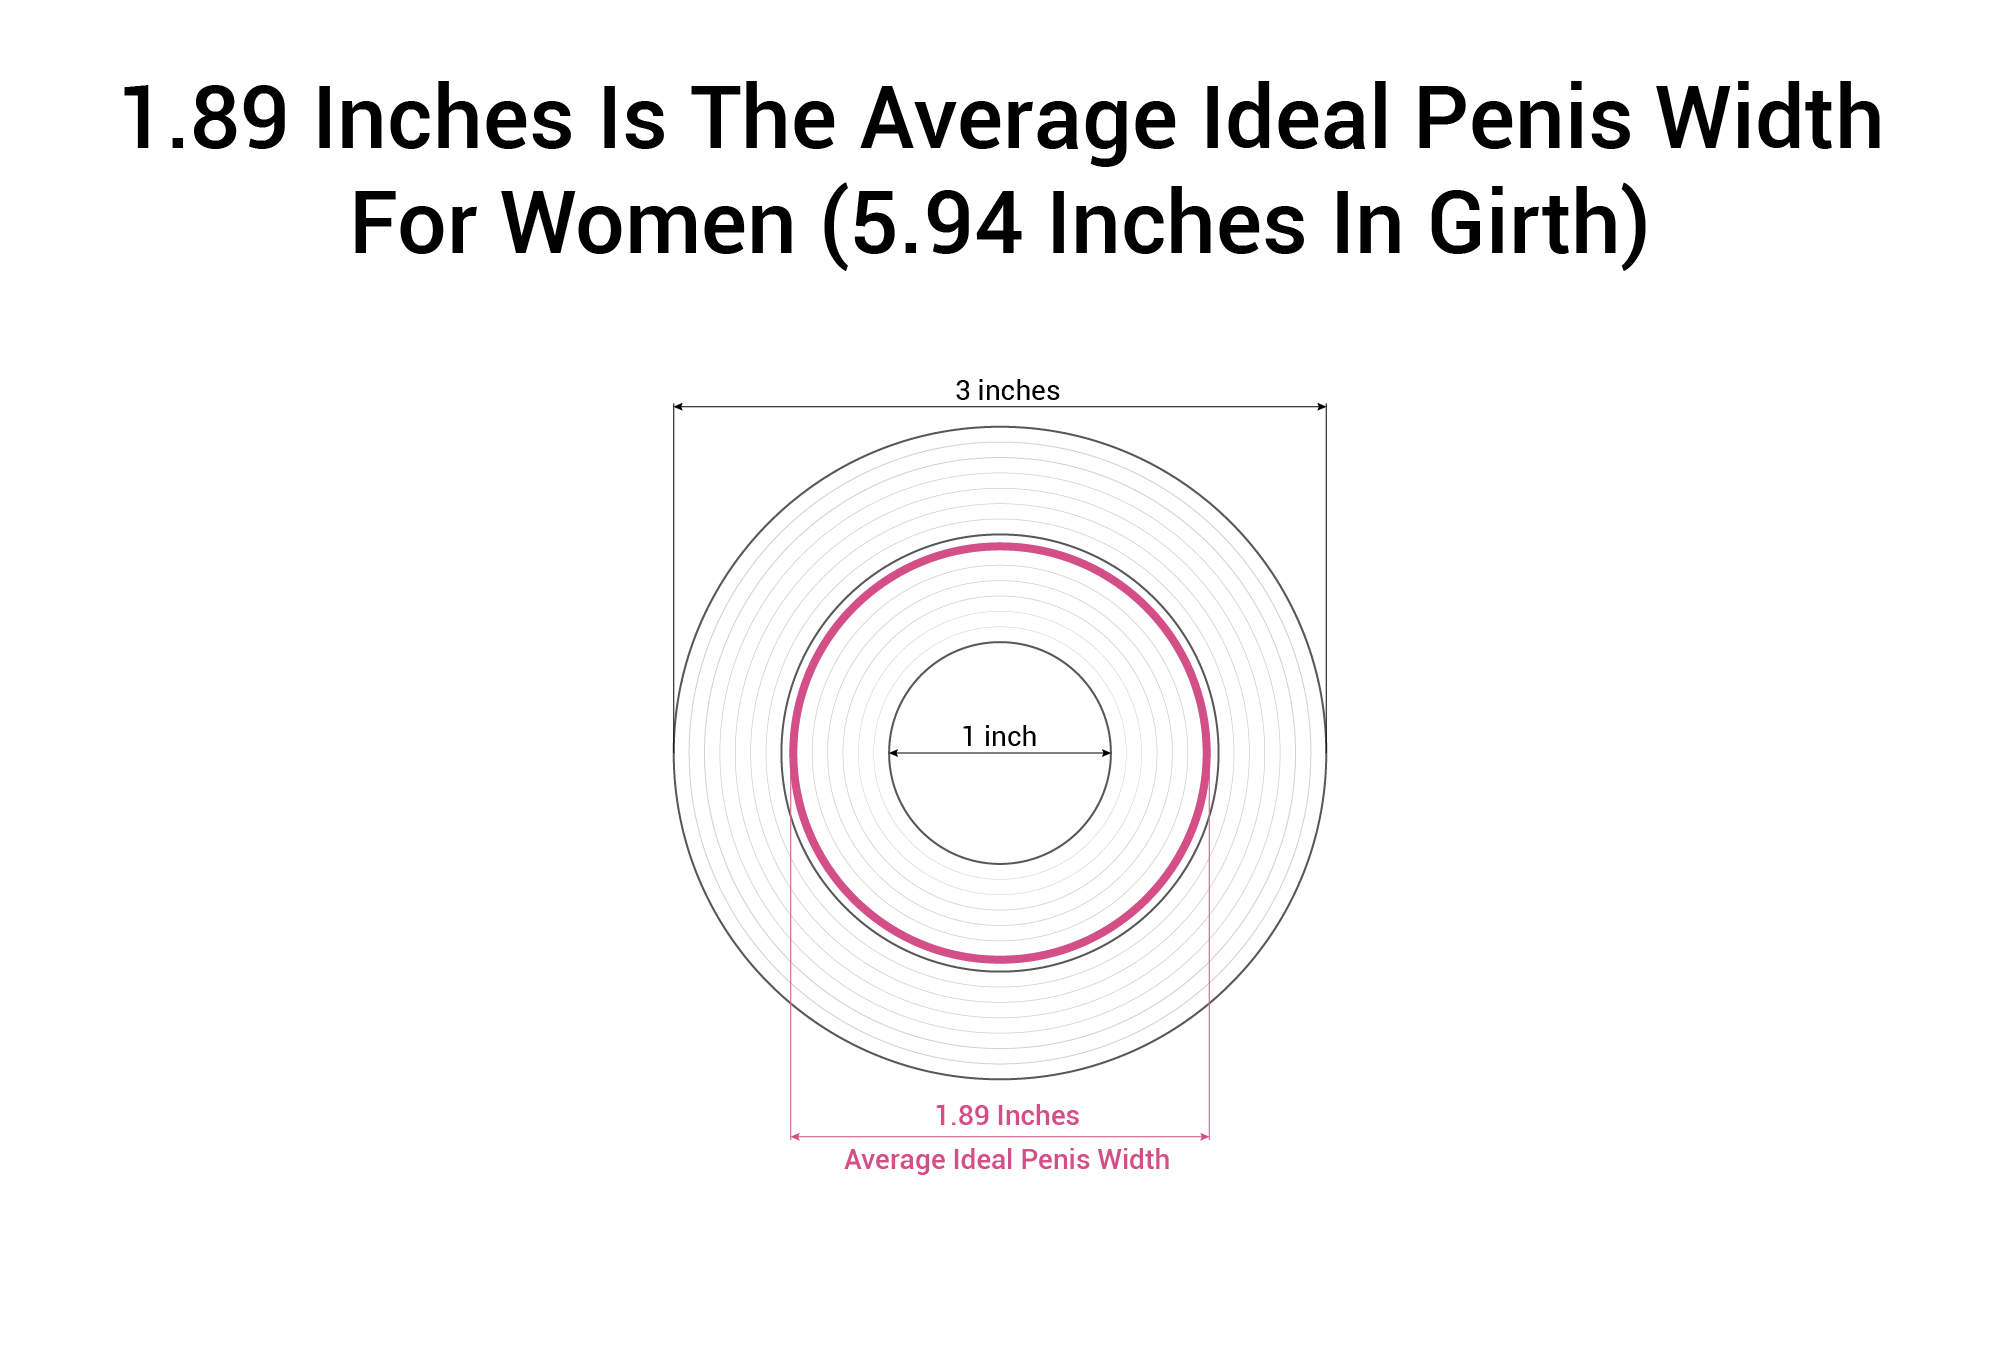 1.89-Inches-Is-The-Average-Ideal-Penis-Width-For-Women-5.94-Inches-In-Girth.png